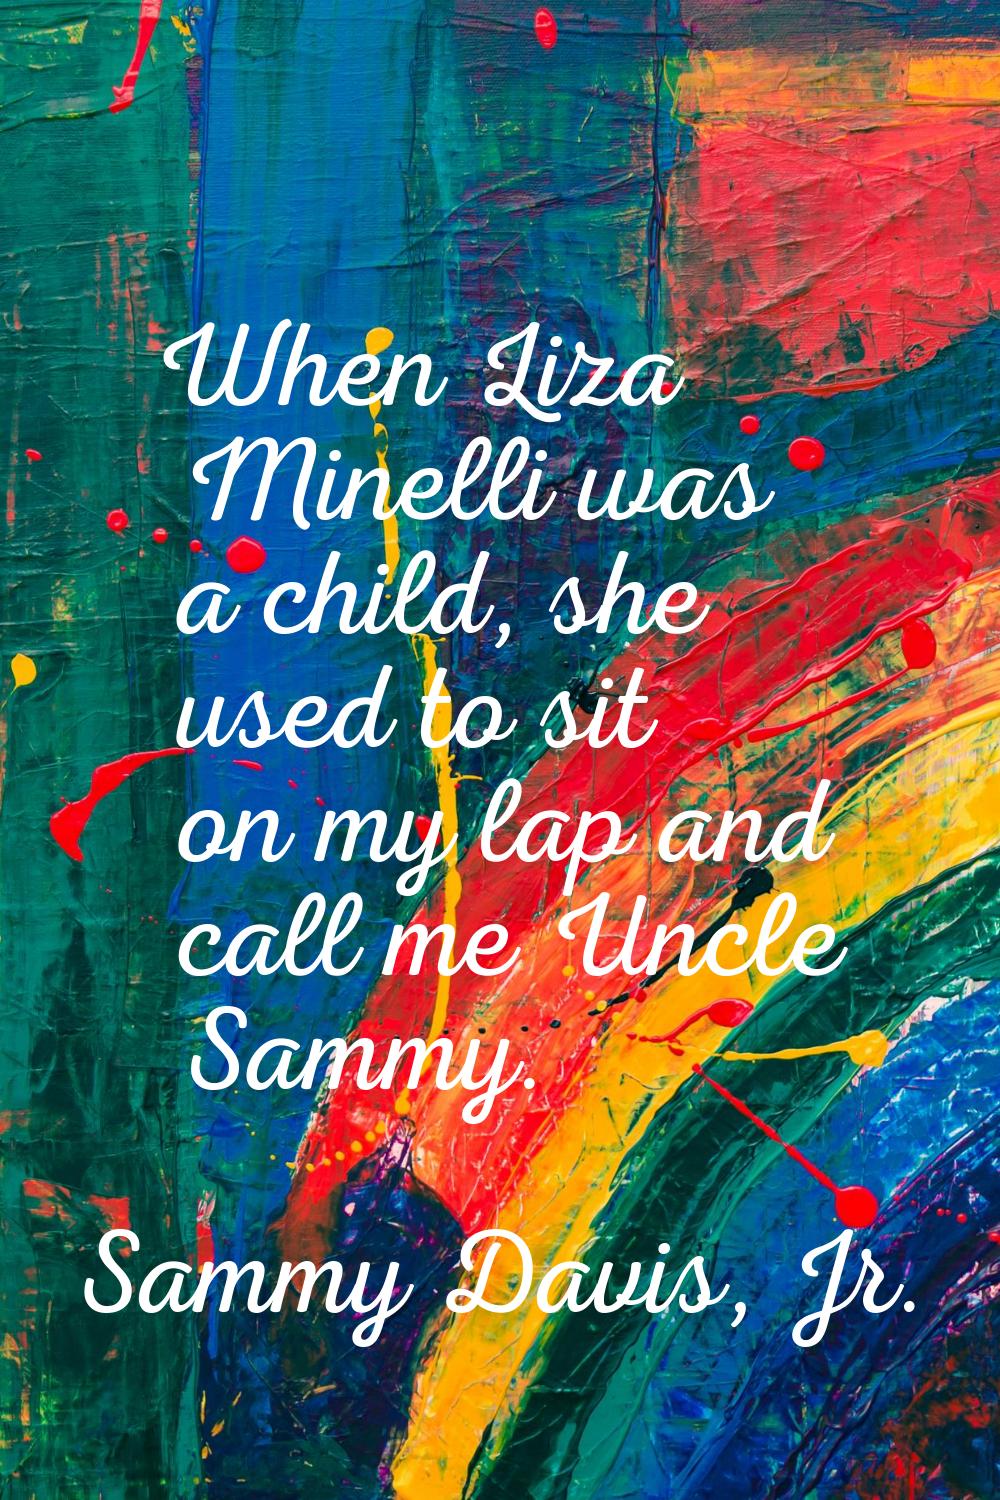 When Liza Minelli was a child, she used to sit on my lap and call me Uncle Sammy.